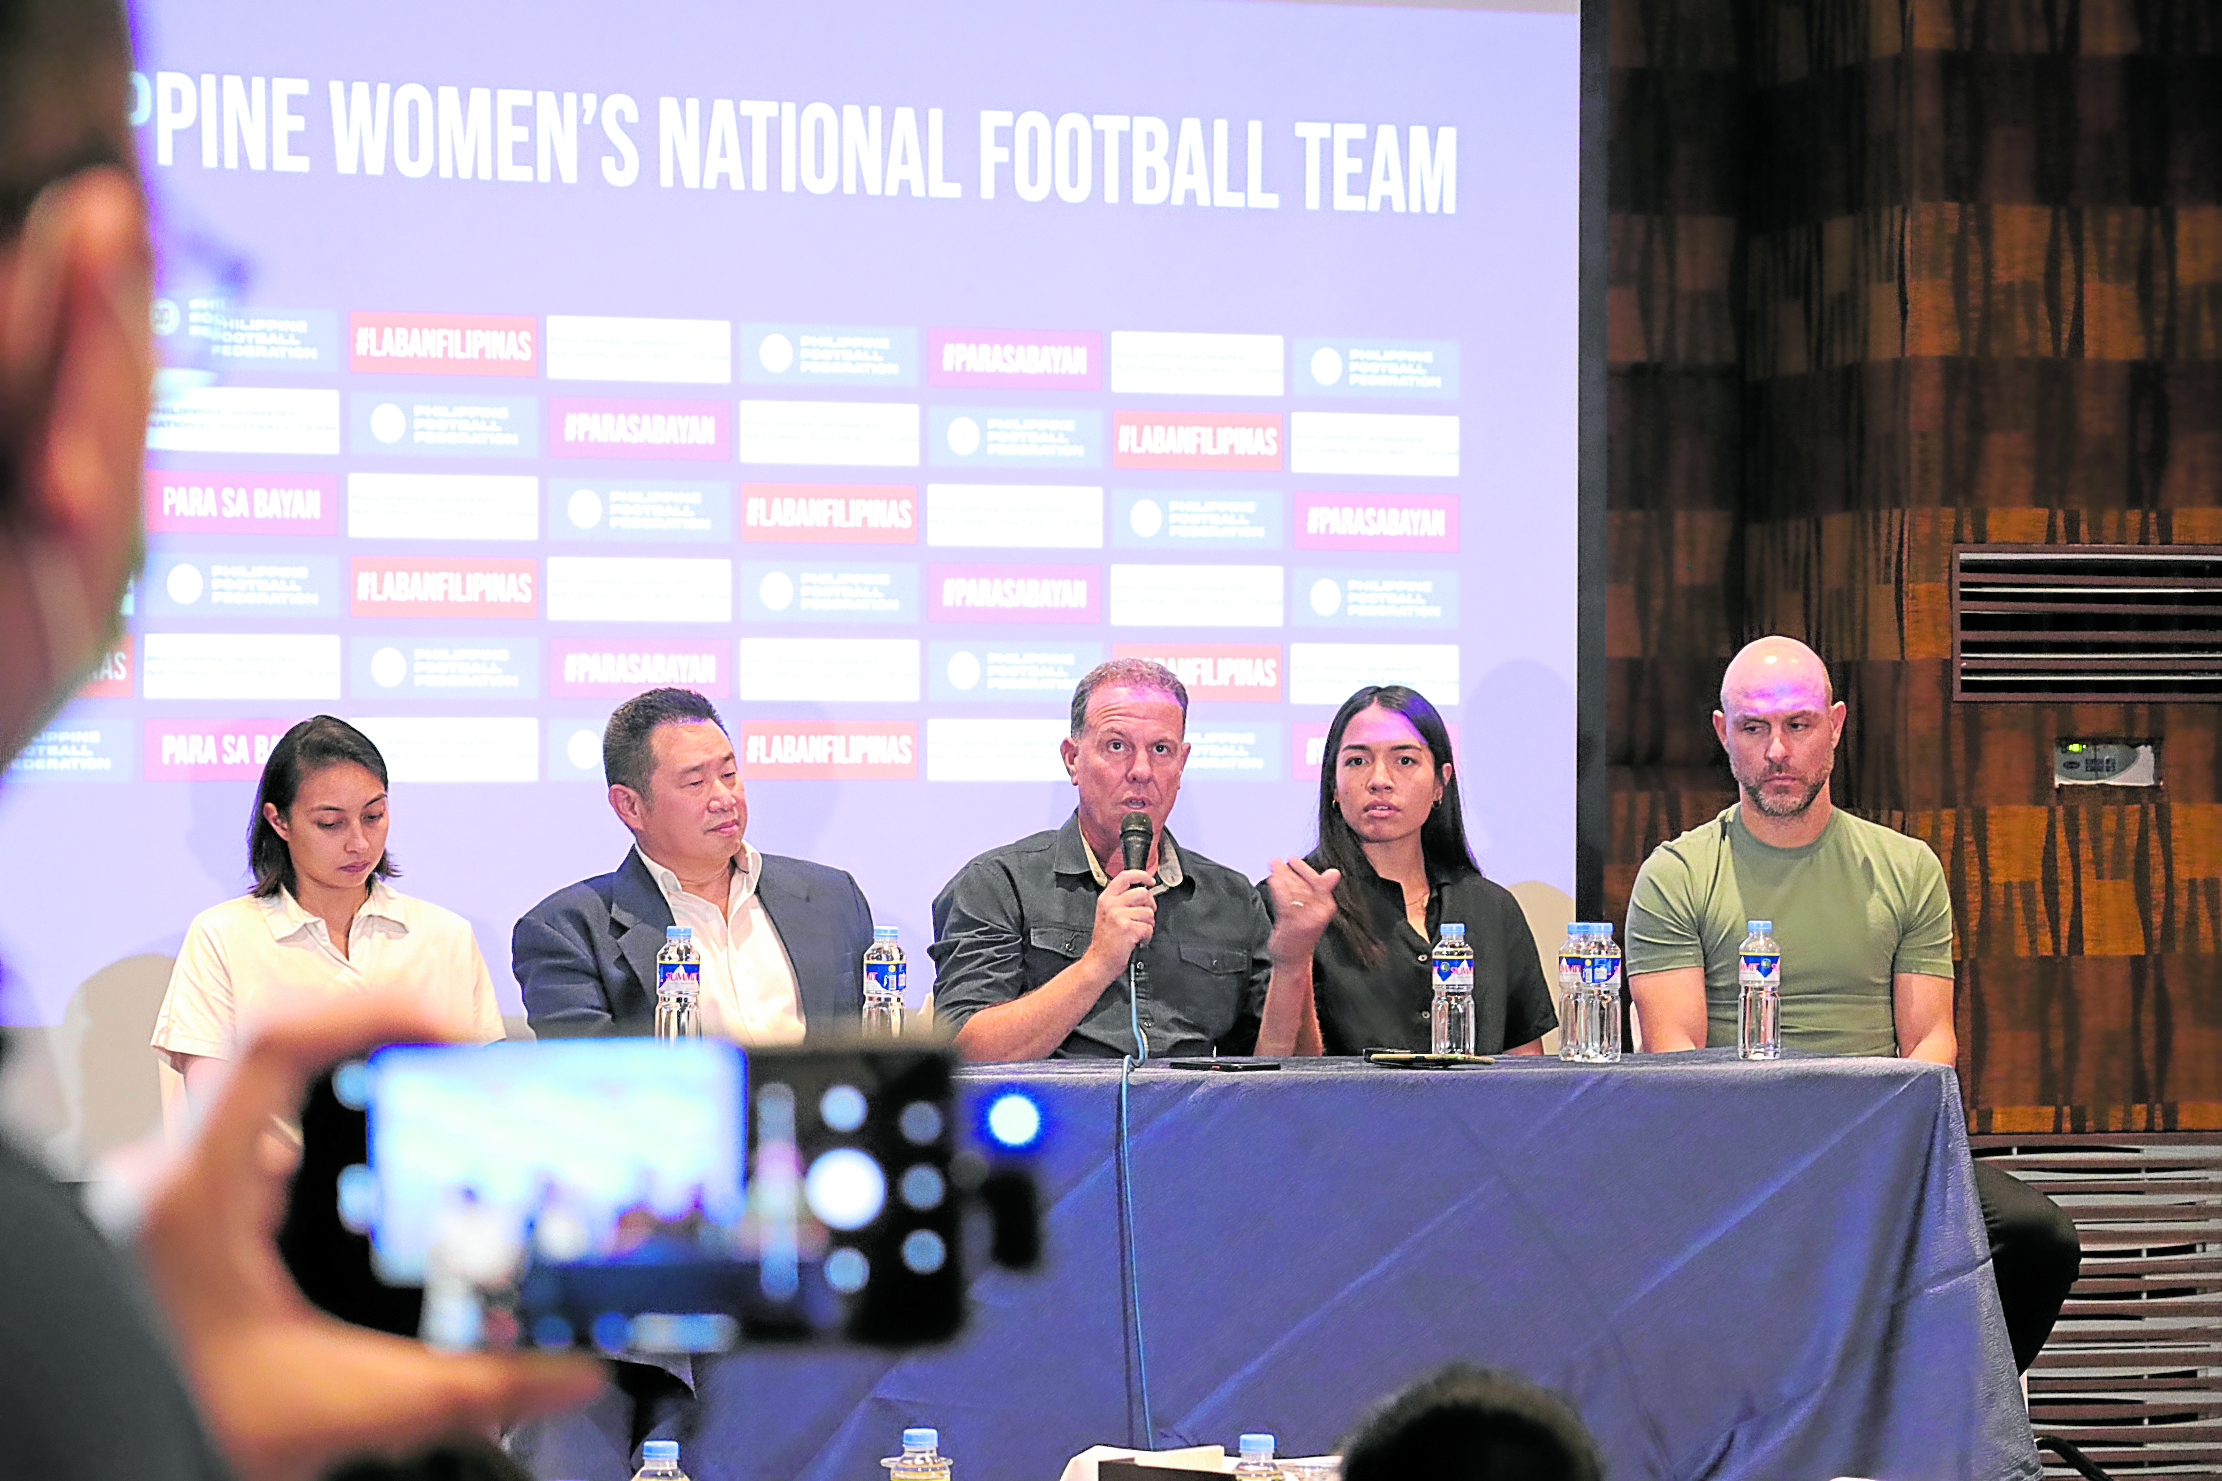 Coach Alan Stejic (center) answers questions during a press conference with (from left) goalkeeper Ana Palacios, team manager Jefferson Cheng, defender Haley Long and U-20 head coach Nahul Araarte.